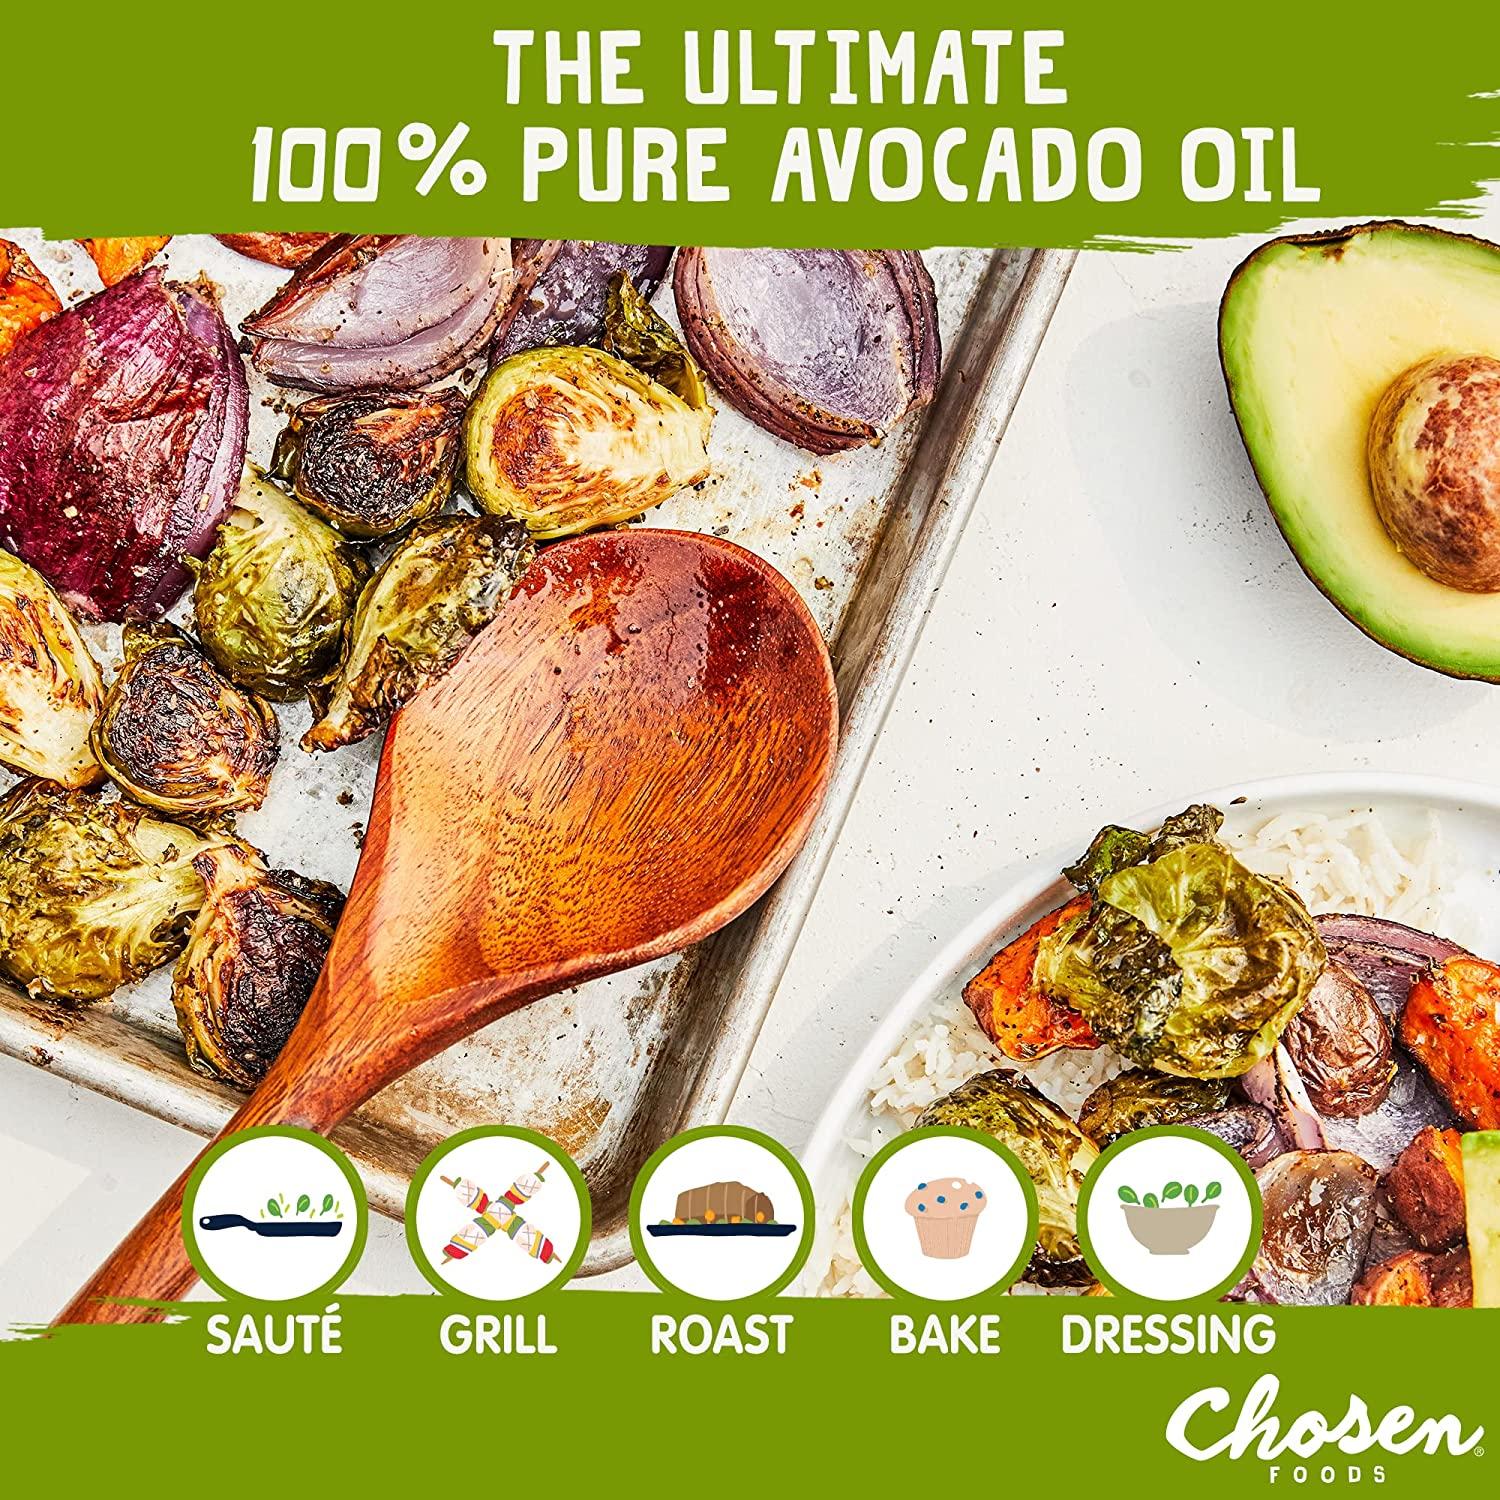 Chosen Foods 100% Pure Avocado Oil, Keto and Paleo Diet Friendly, Kosher Oil  for Baking, High-Heat Cooking, Frying, Homemade Sauces, Dressings and  Marinades (25.4 fl oz, 2 Pack) 25.4 Fl Oz (Pack of 2)